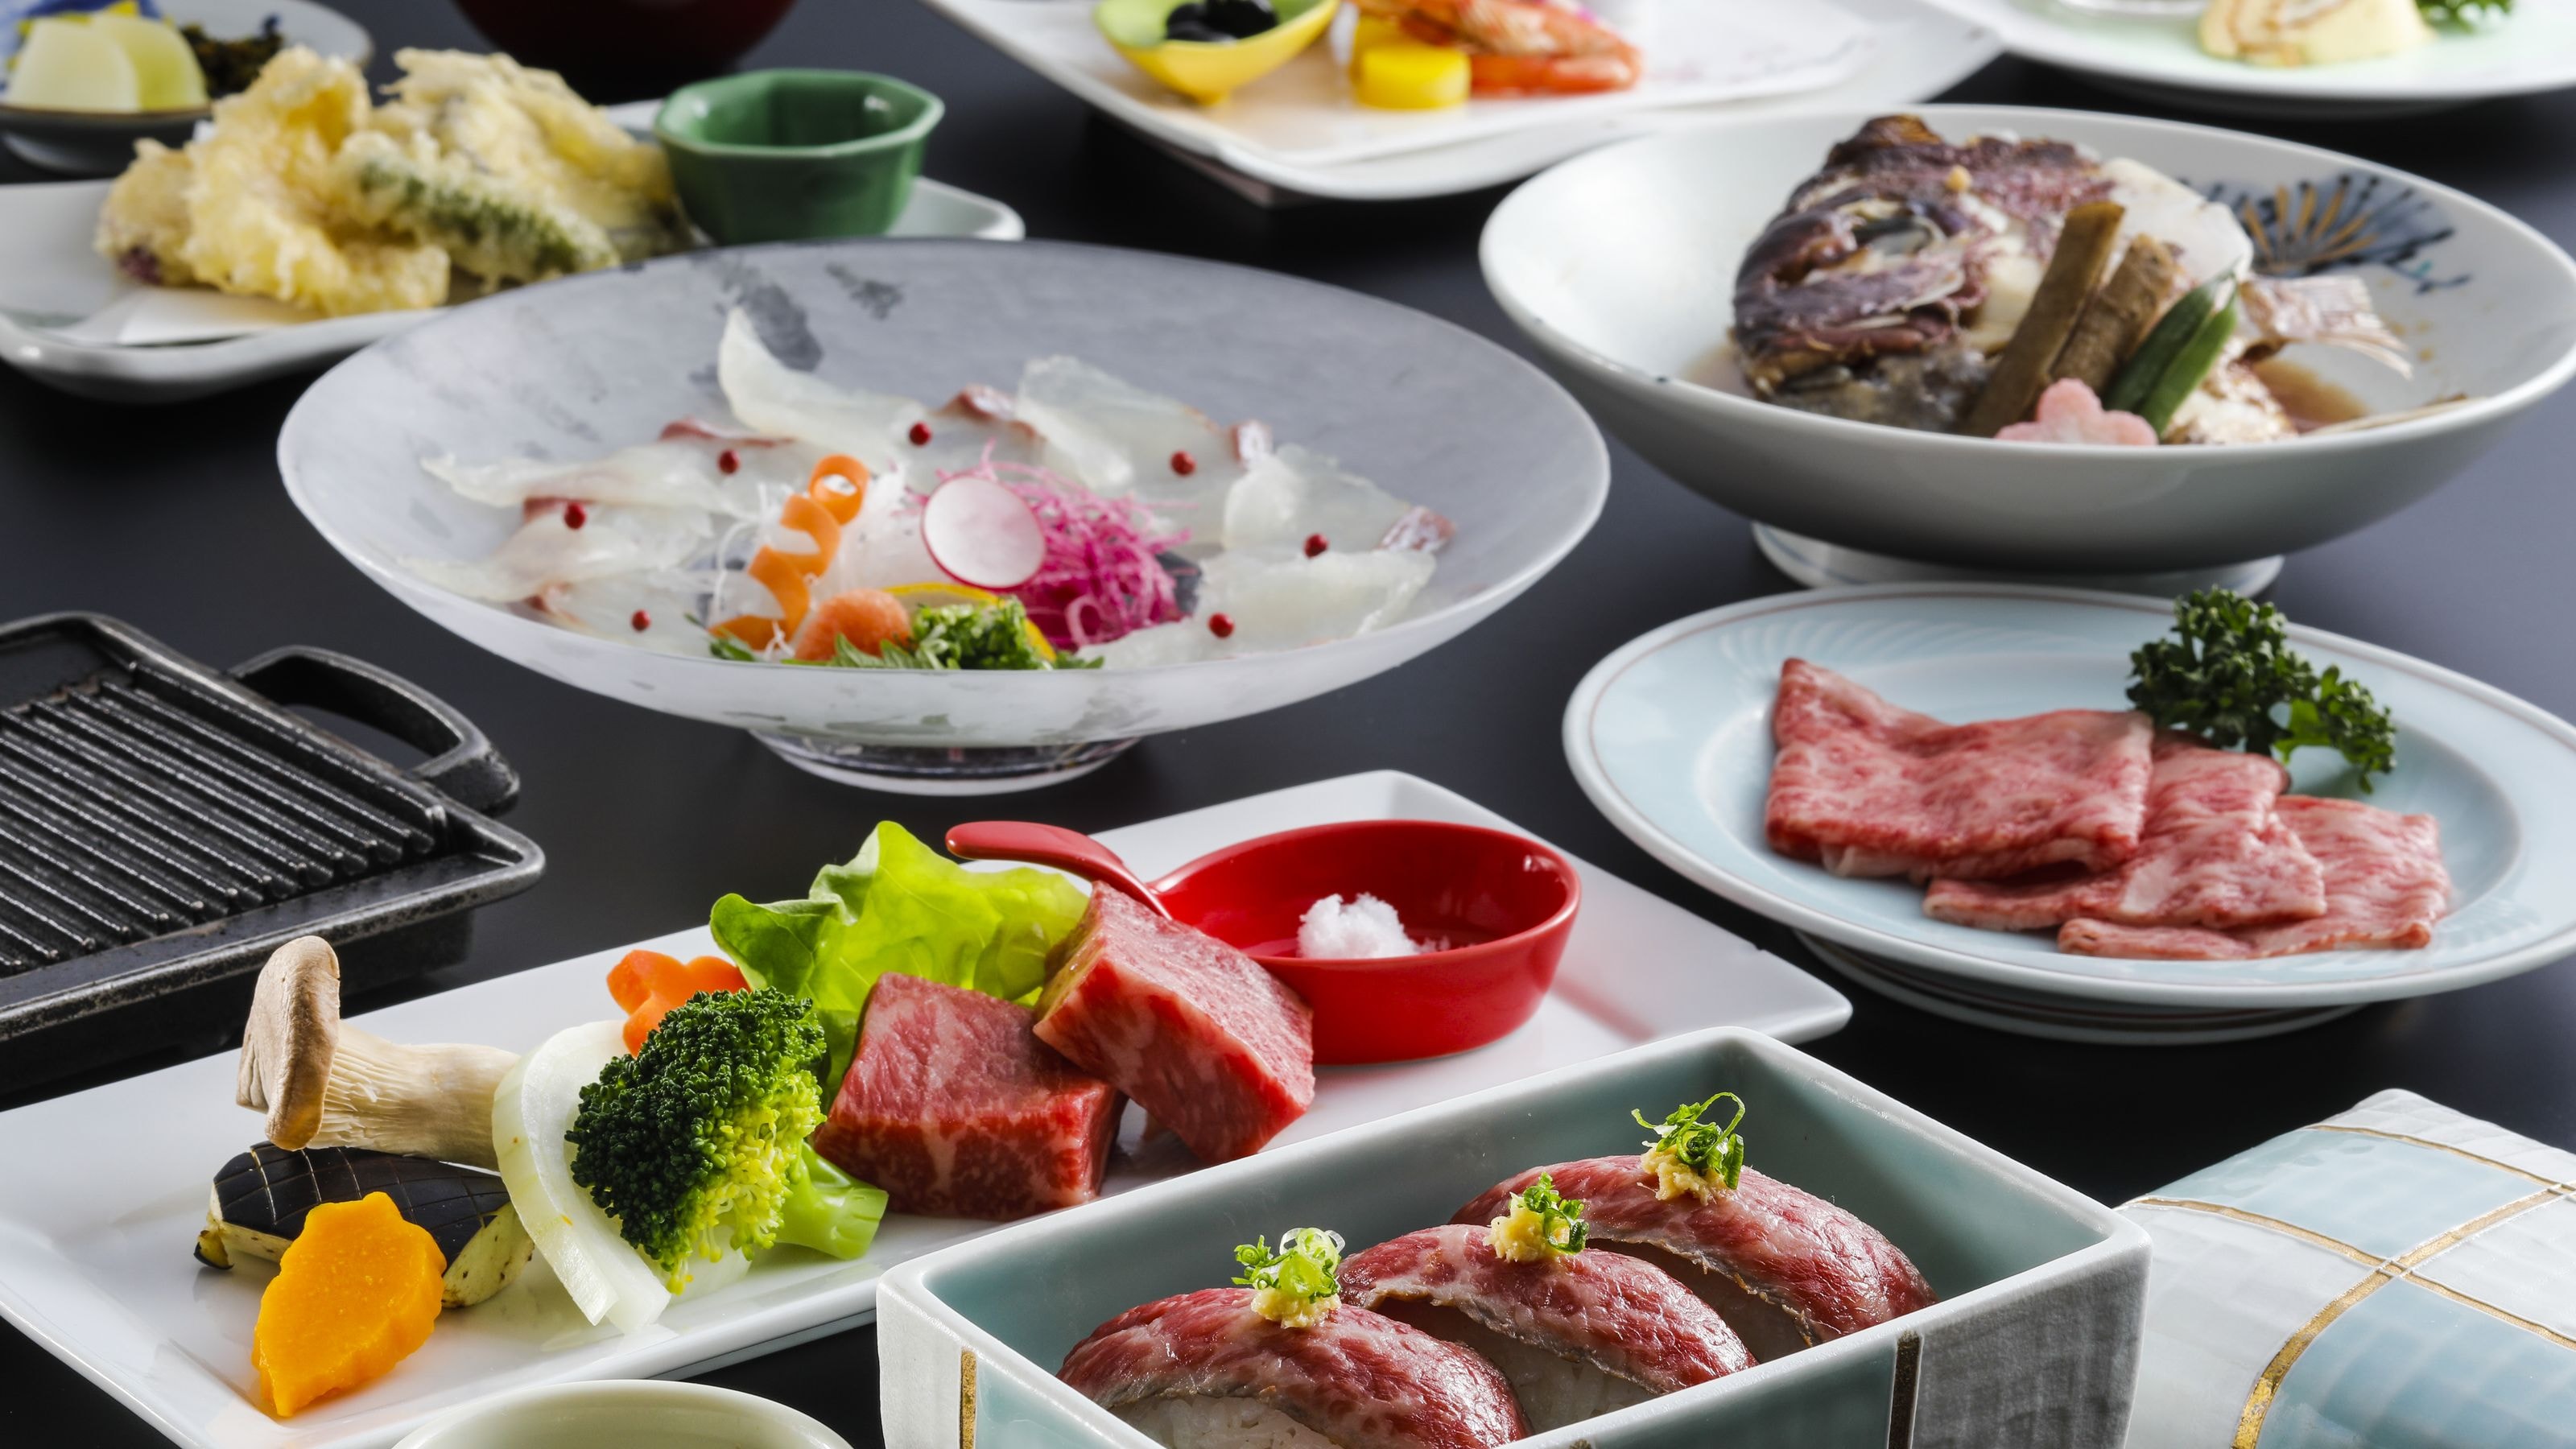 * Triple Iyo beef kaiseki example: Ehime prefecture brand beef, Iyo beef "silk taste" is used! Please enjoy the gems that are difficult to purchase